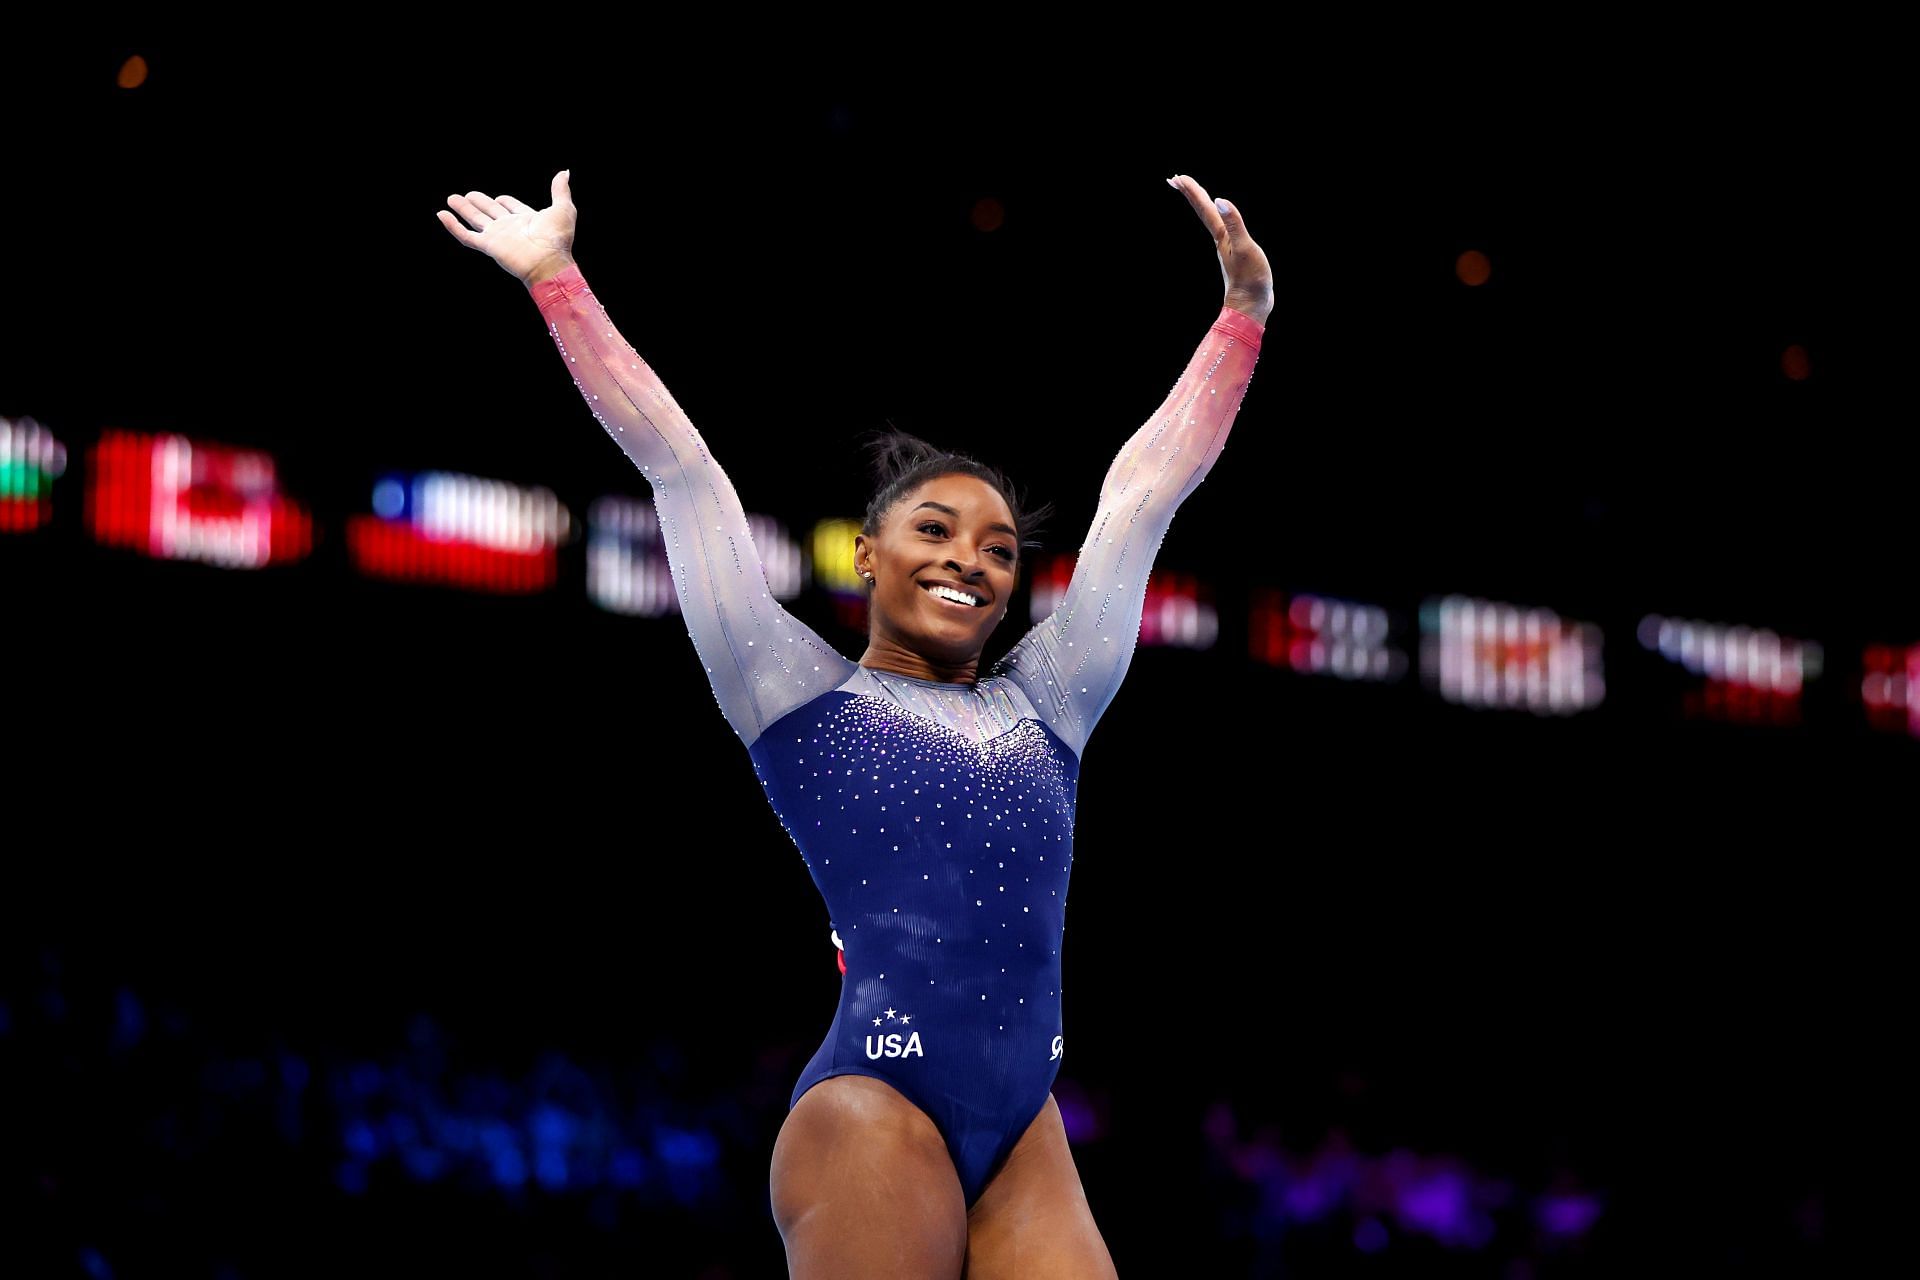 Simone Biles celebrates after her routine on Floor Exercise during the Women&#039;s Team Final at the 2023 Artistic Gymnastics World Championships in Antwerp, Belgium